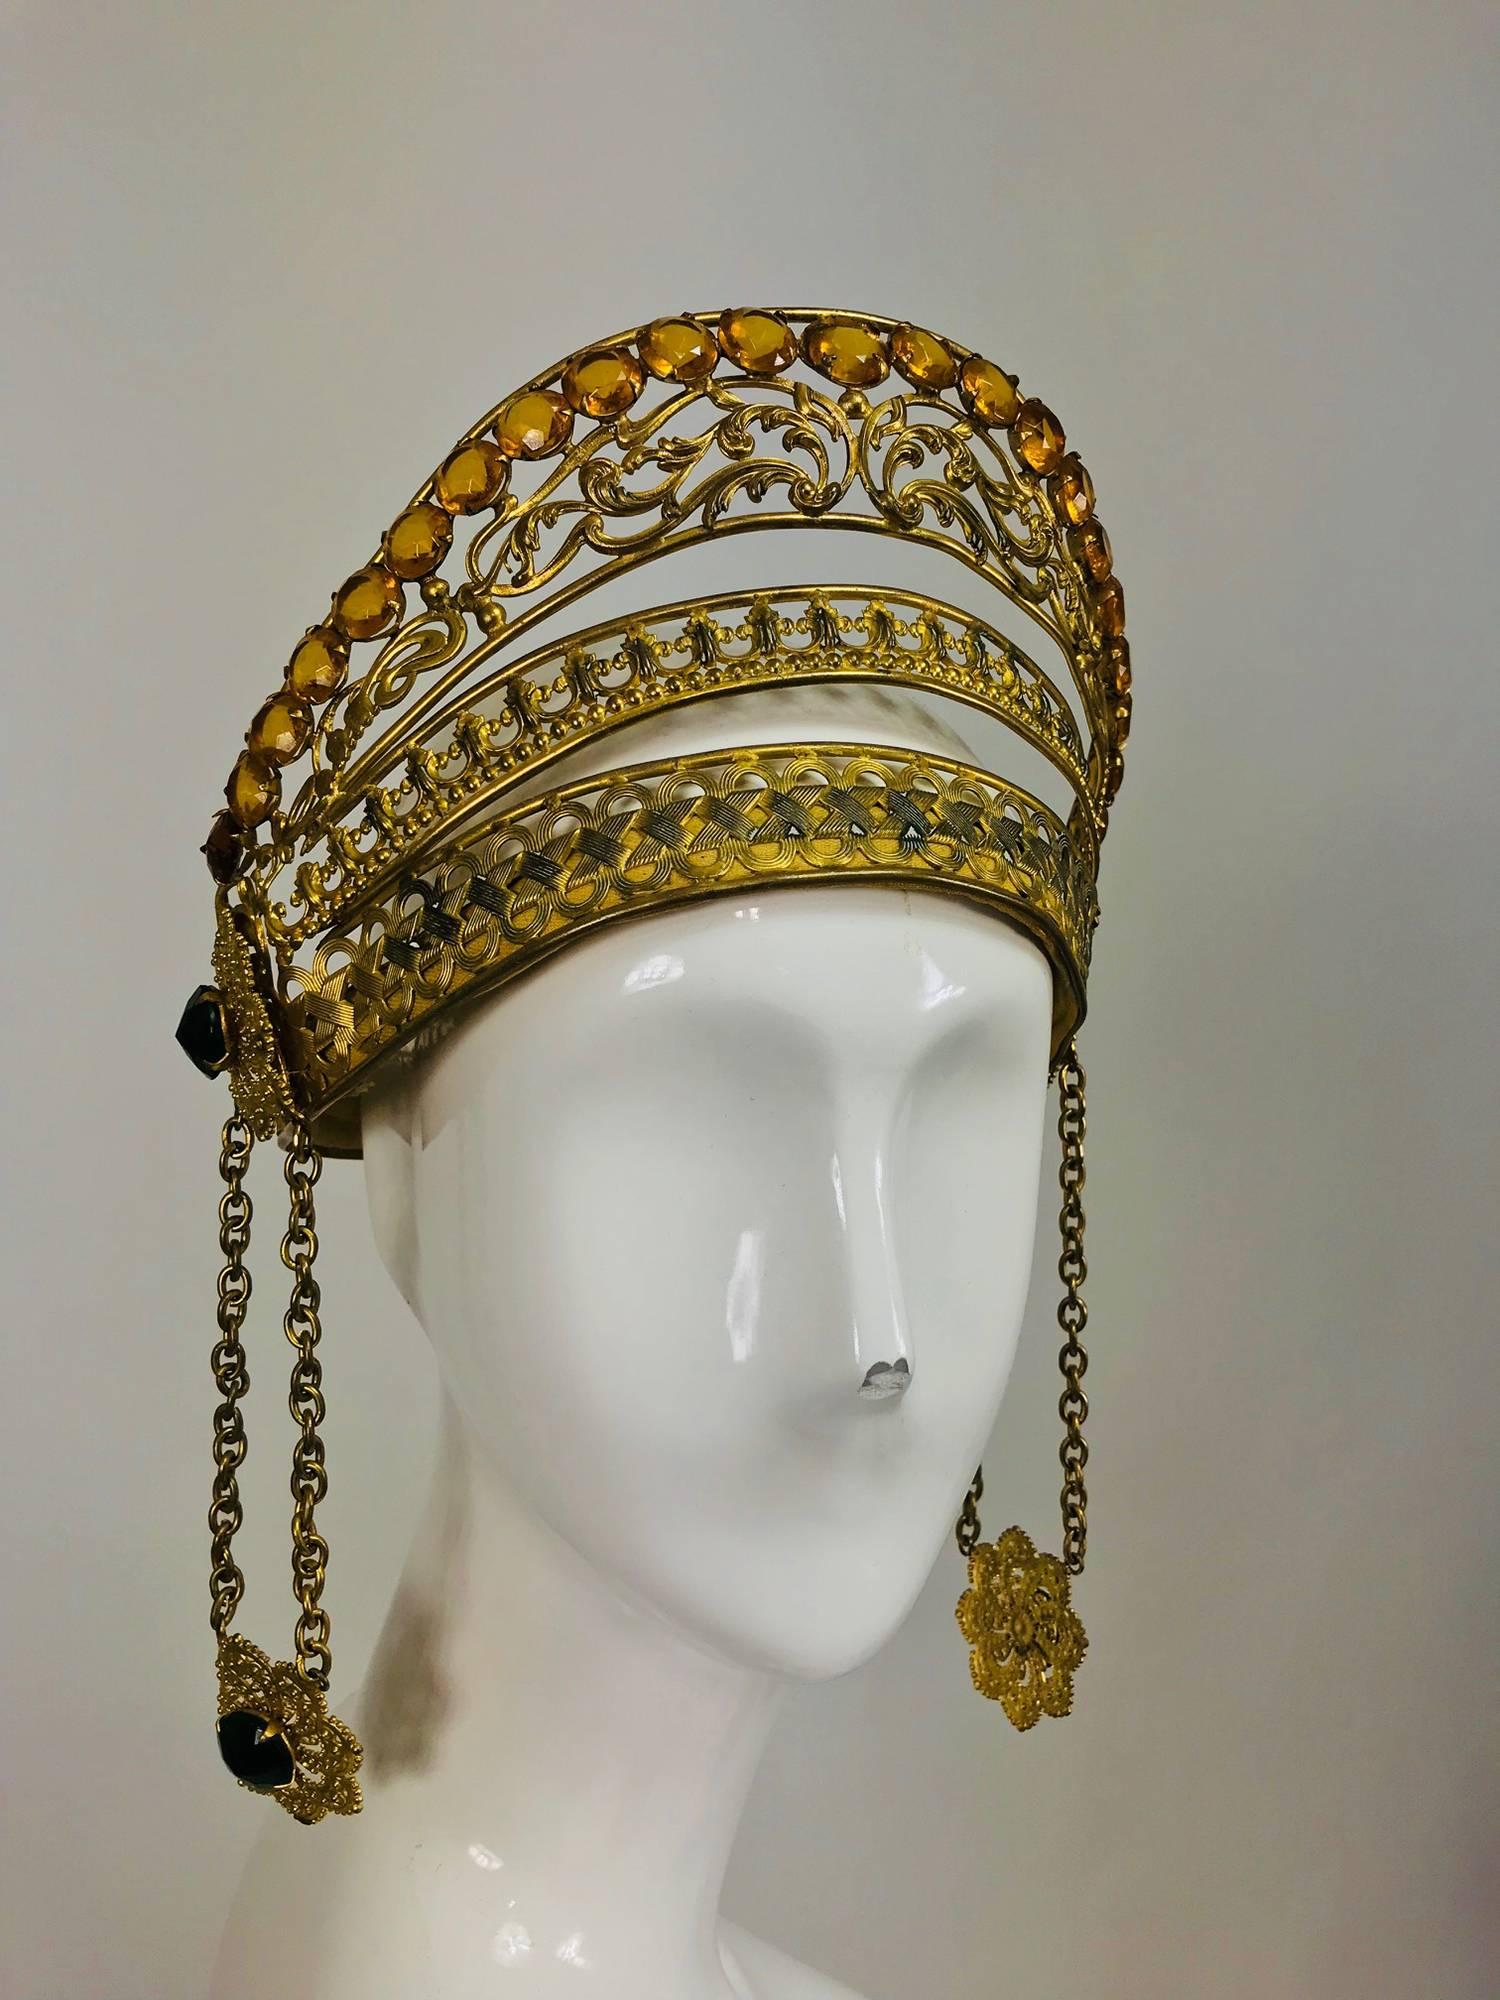 Gray Rare Crown headdress gilt metal with jewels and side drops early 1900s